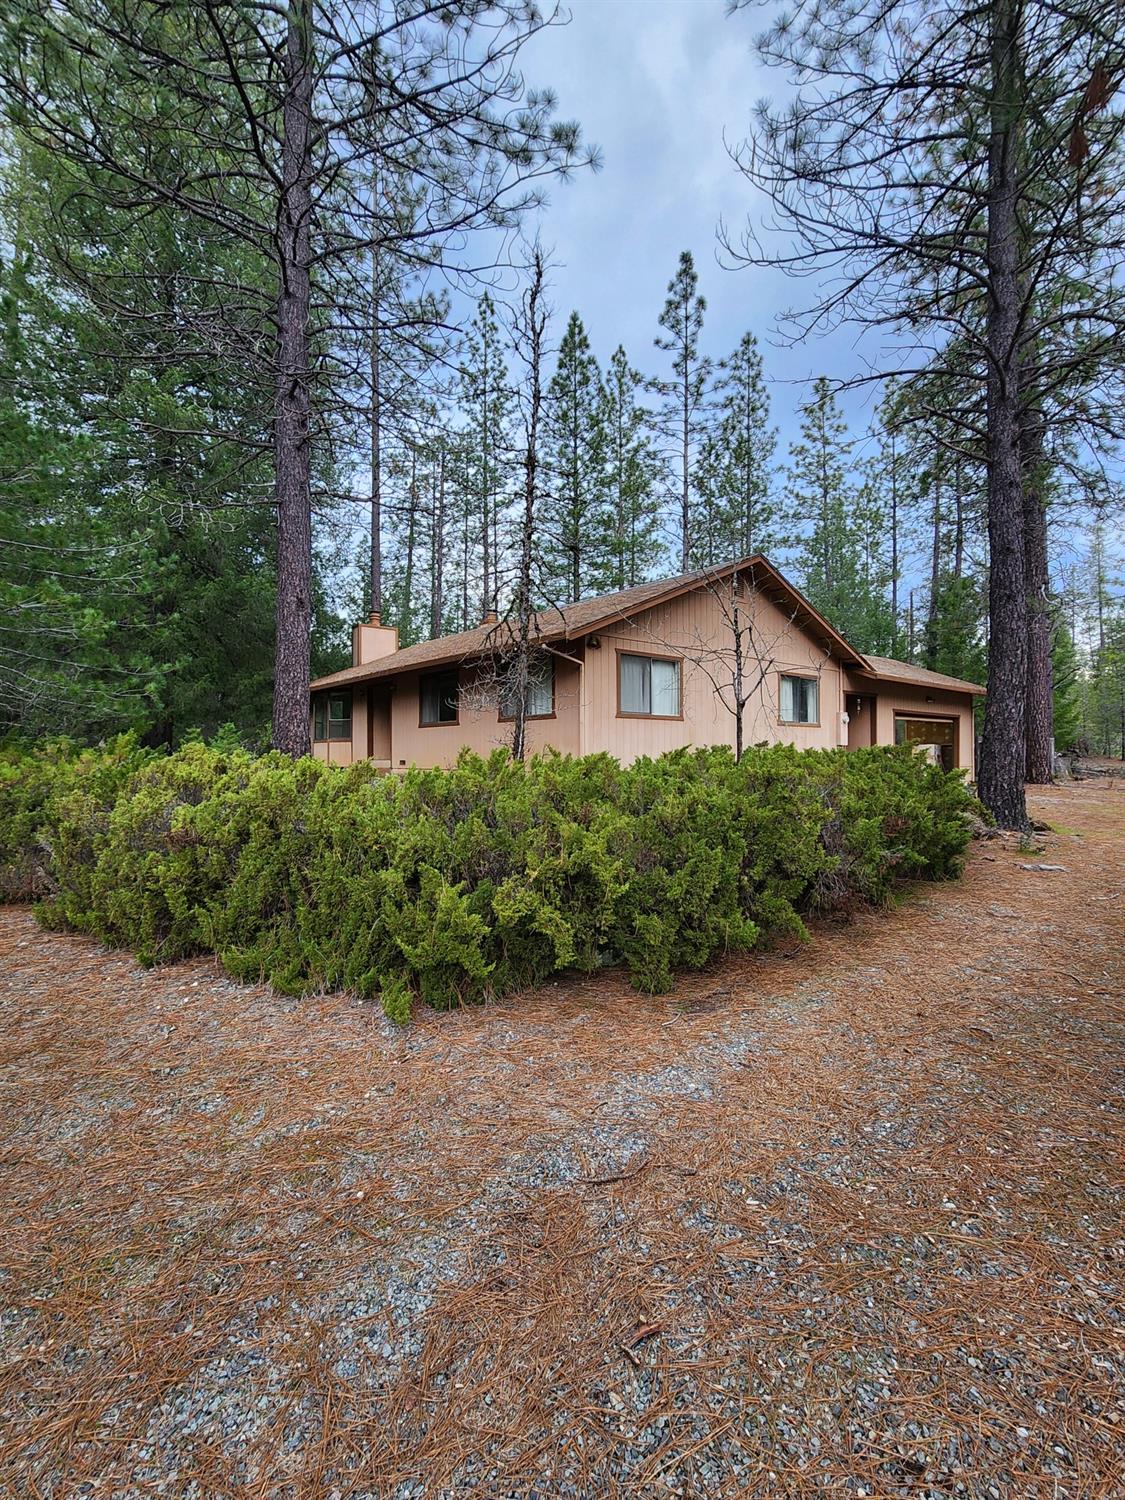 12889 Pine View Drive, Grass Valley, CA 95945